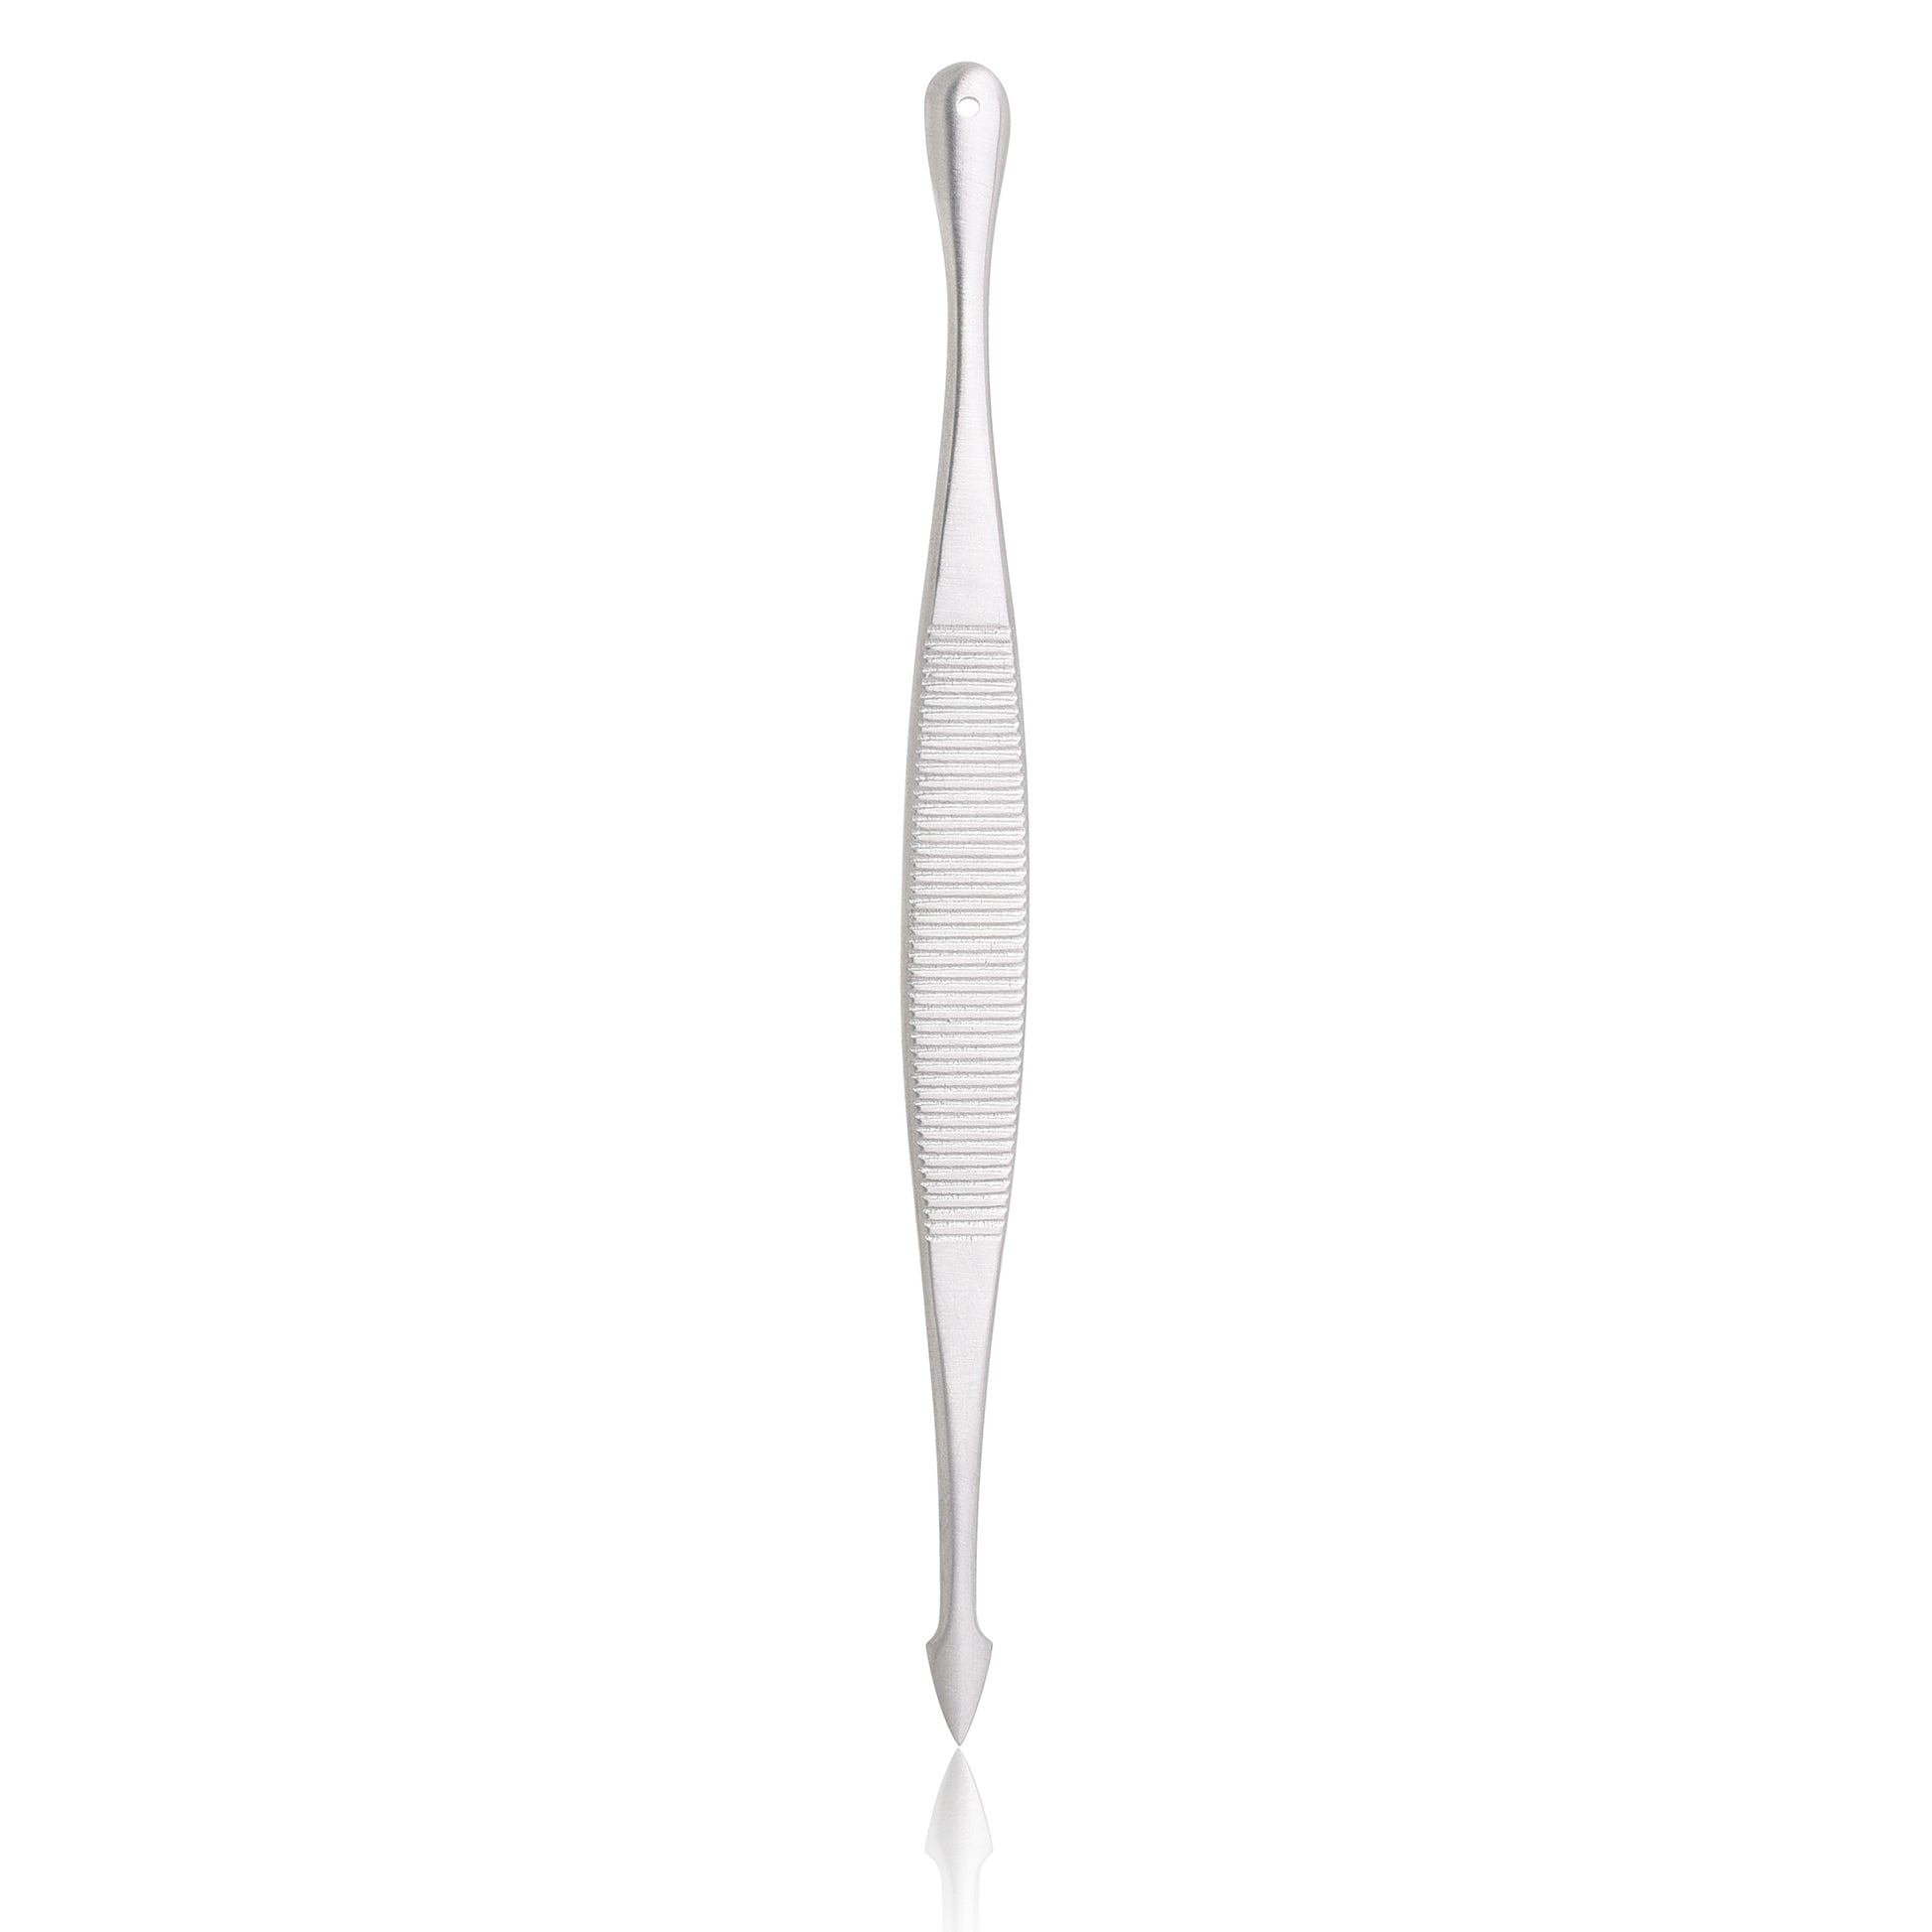 Effortlessly remove blackheads with our Comedone Extractor Fine Line Blackhead Remover. Crafted from grade 1 tempered stainless steel, its calibrated pointed edge ensures precise extraction, promising durability for years to come.